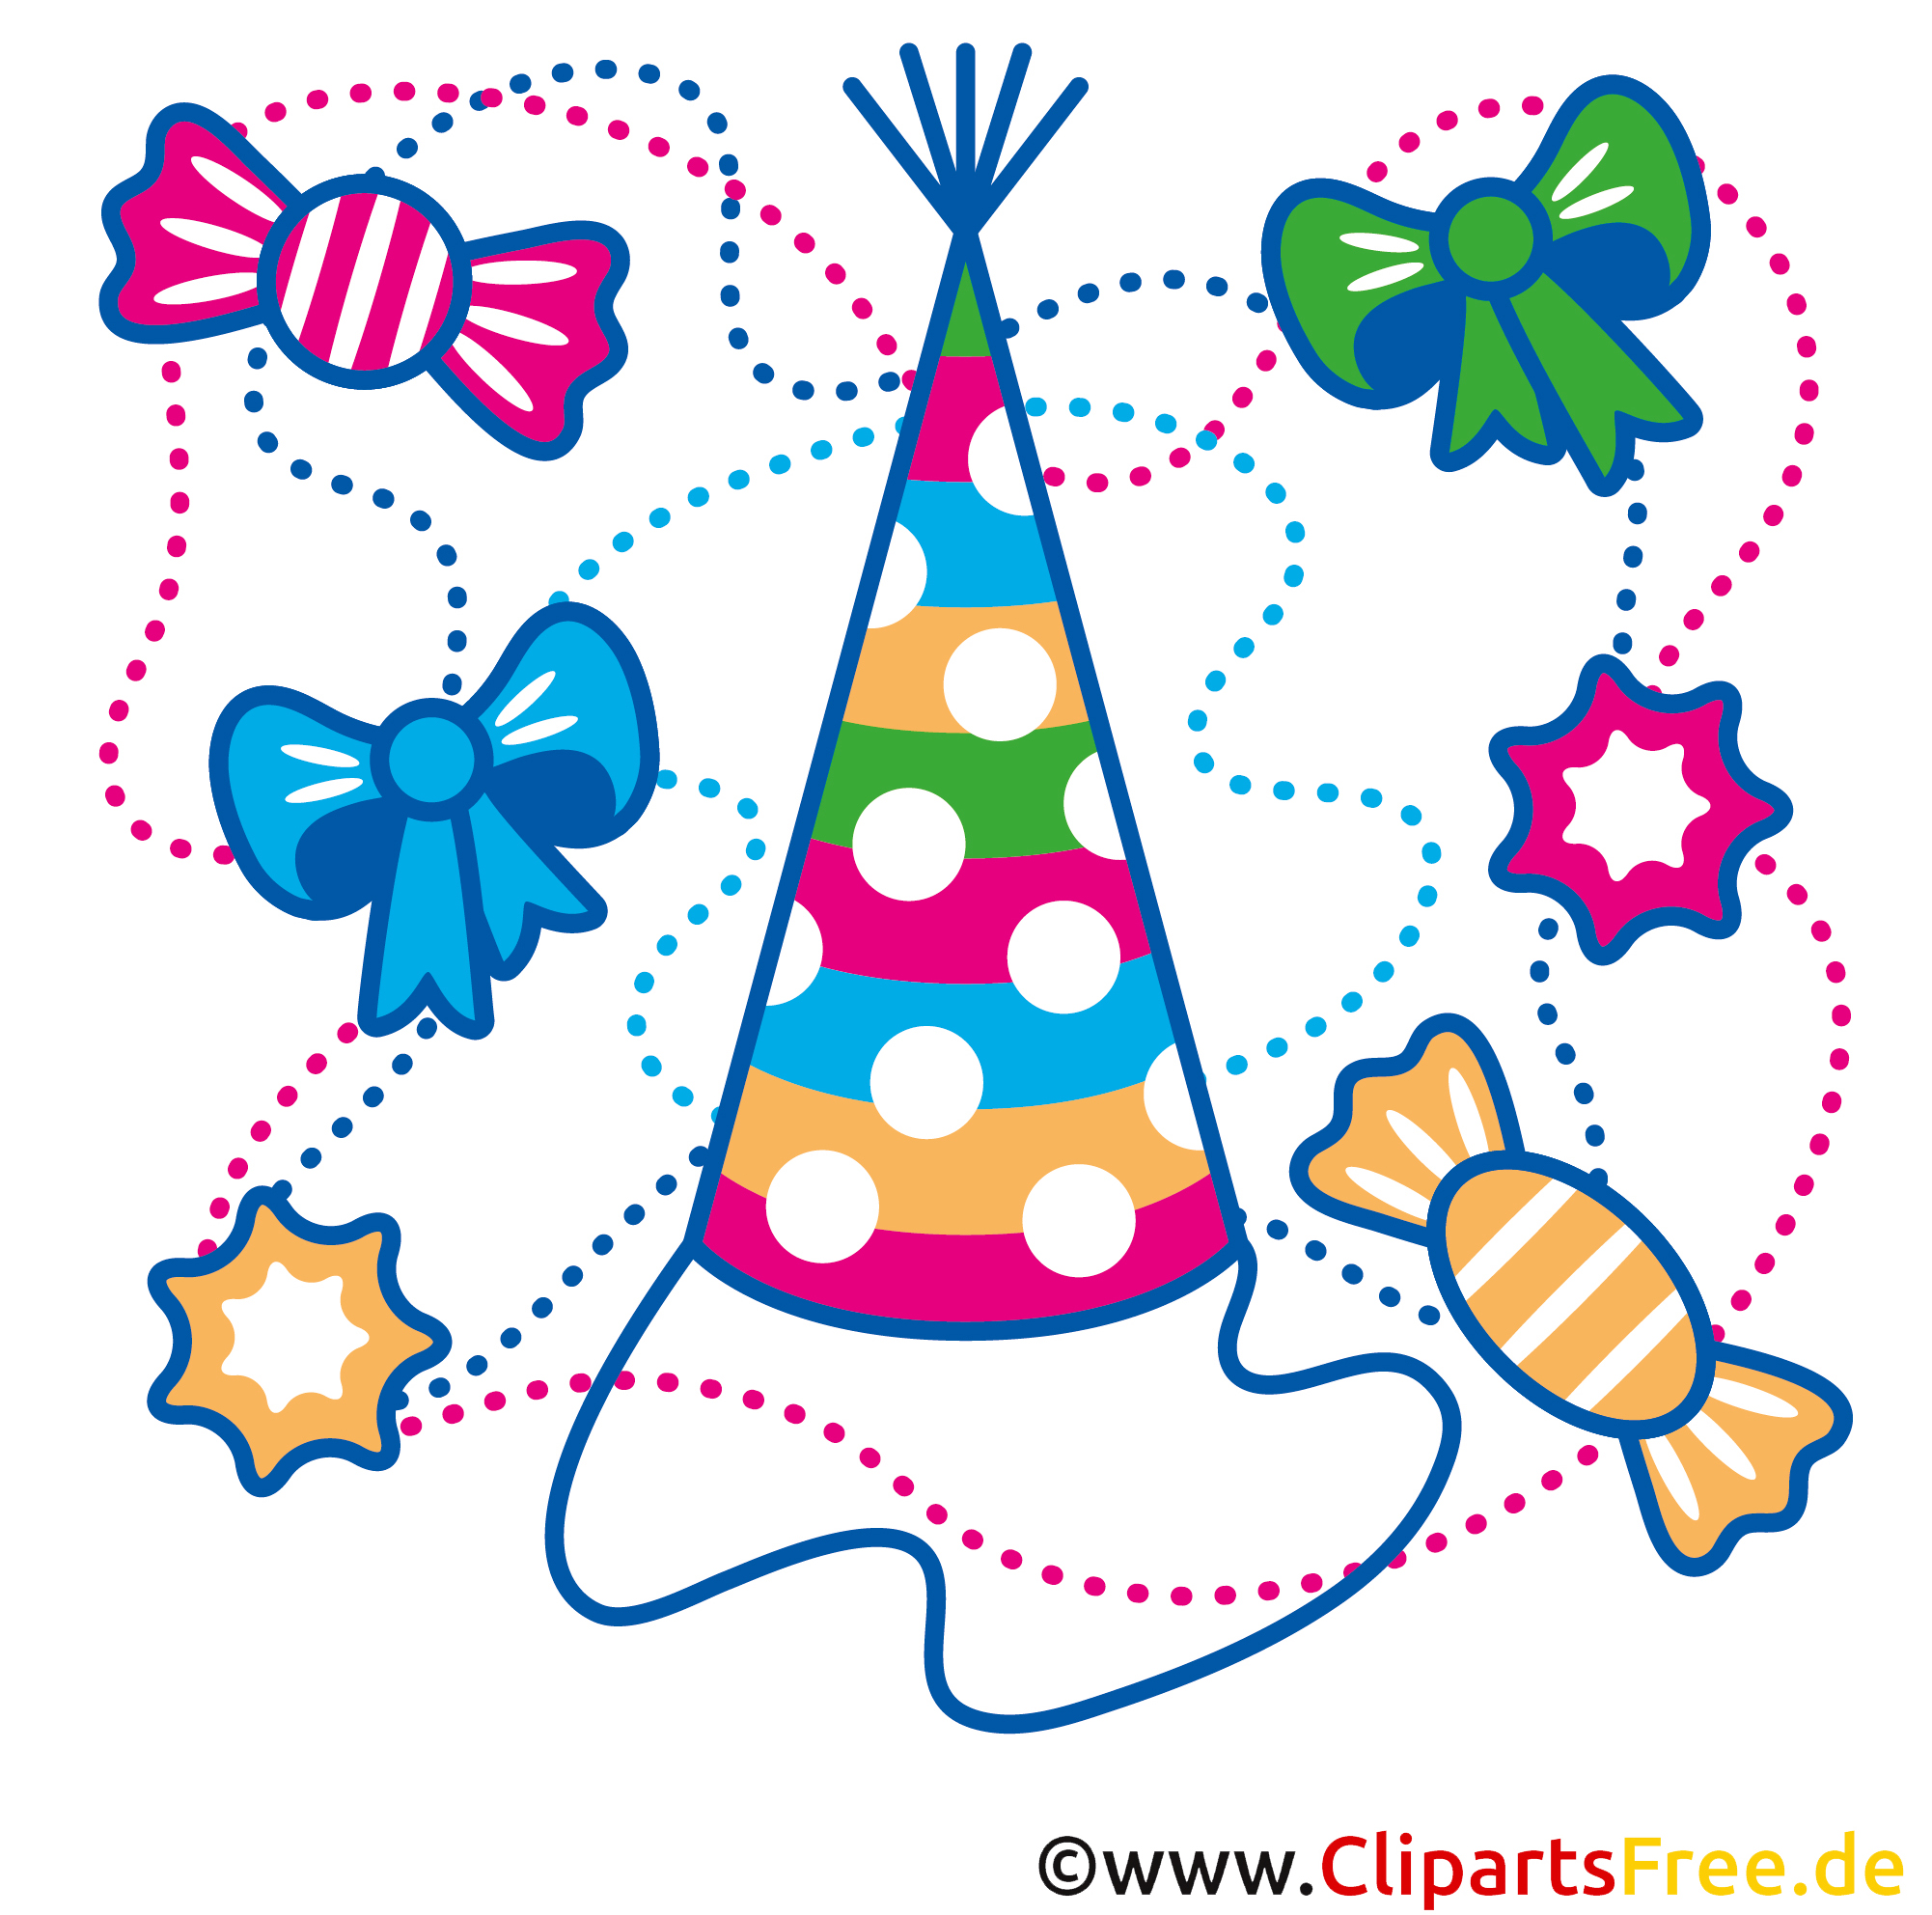 free clipart images party - photo #37